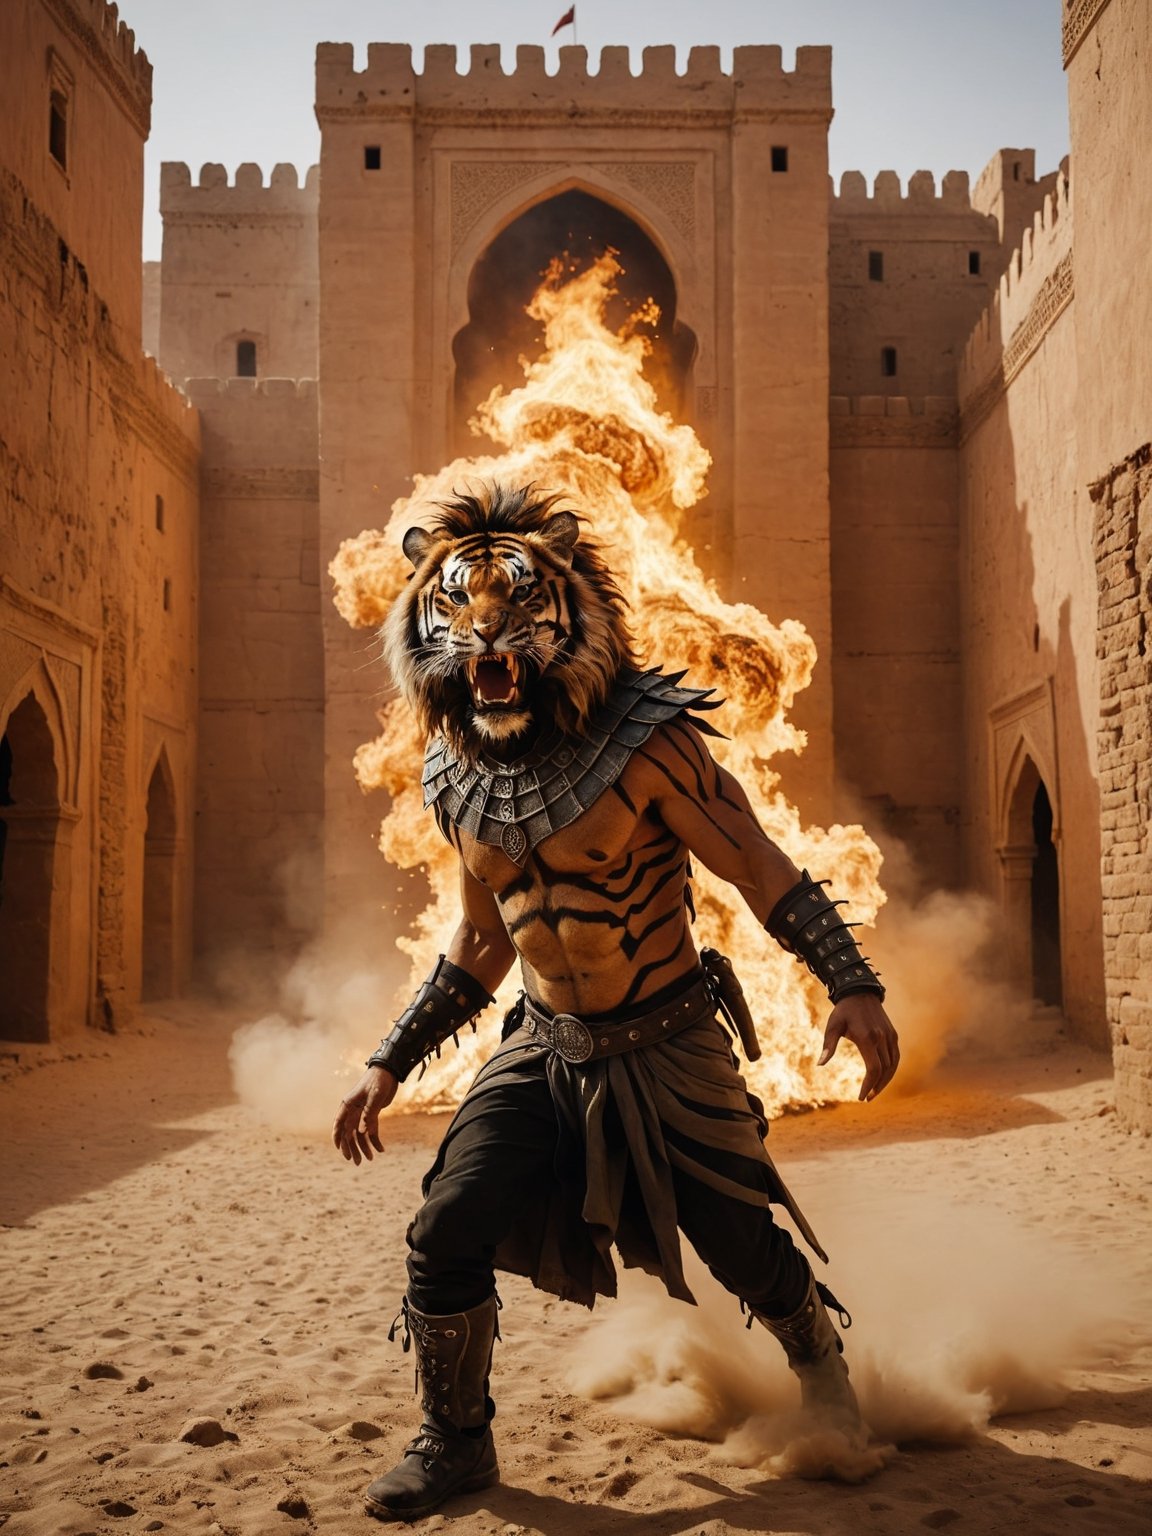 + Metalhead, Tigre, Q2, nomad, in Moroccan desert castle, full body photo view, Horror wave, burning, abyssal, epic cinematographic shot of moving dynamics, main theme of a high budget action film, rough photography, motion blur, better quality, high resolution
